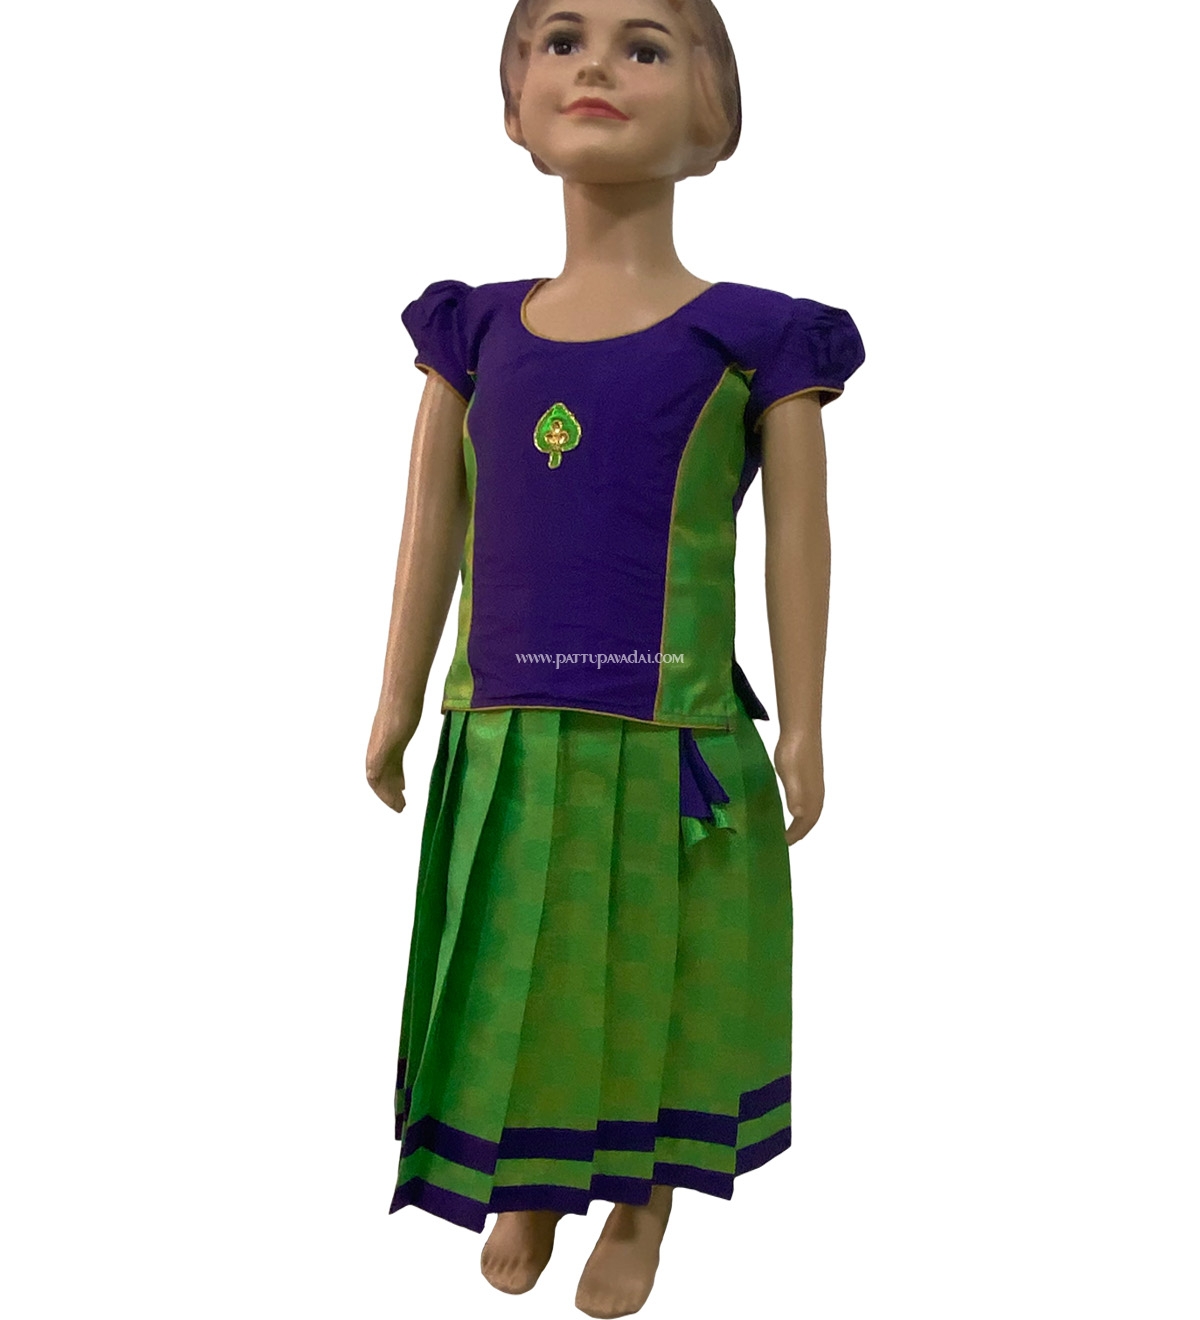 Brocade Violet Skirt and Parrot Green Top